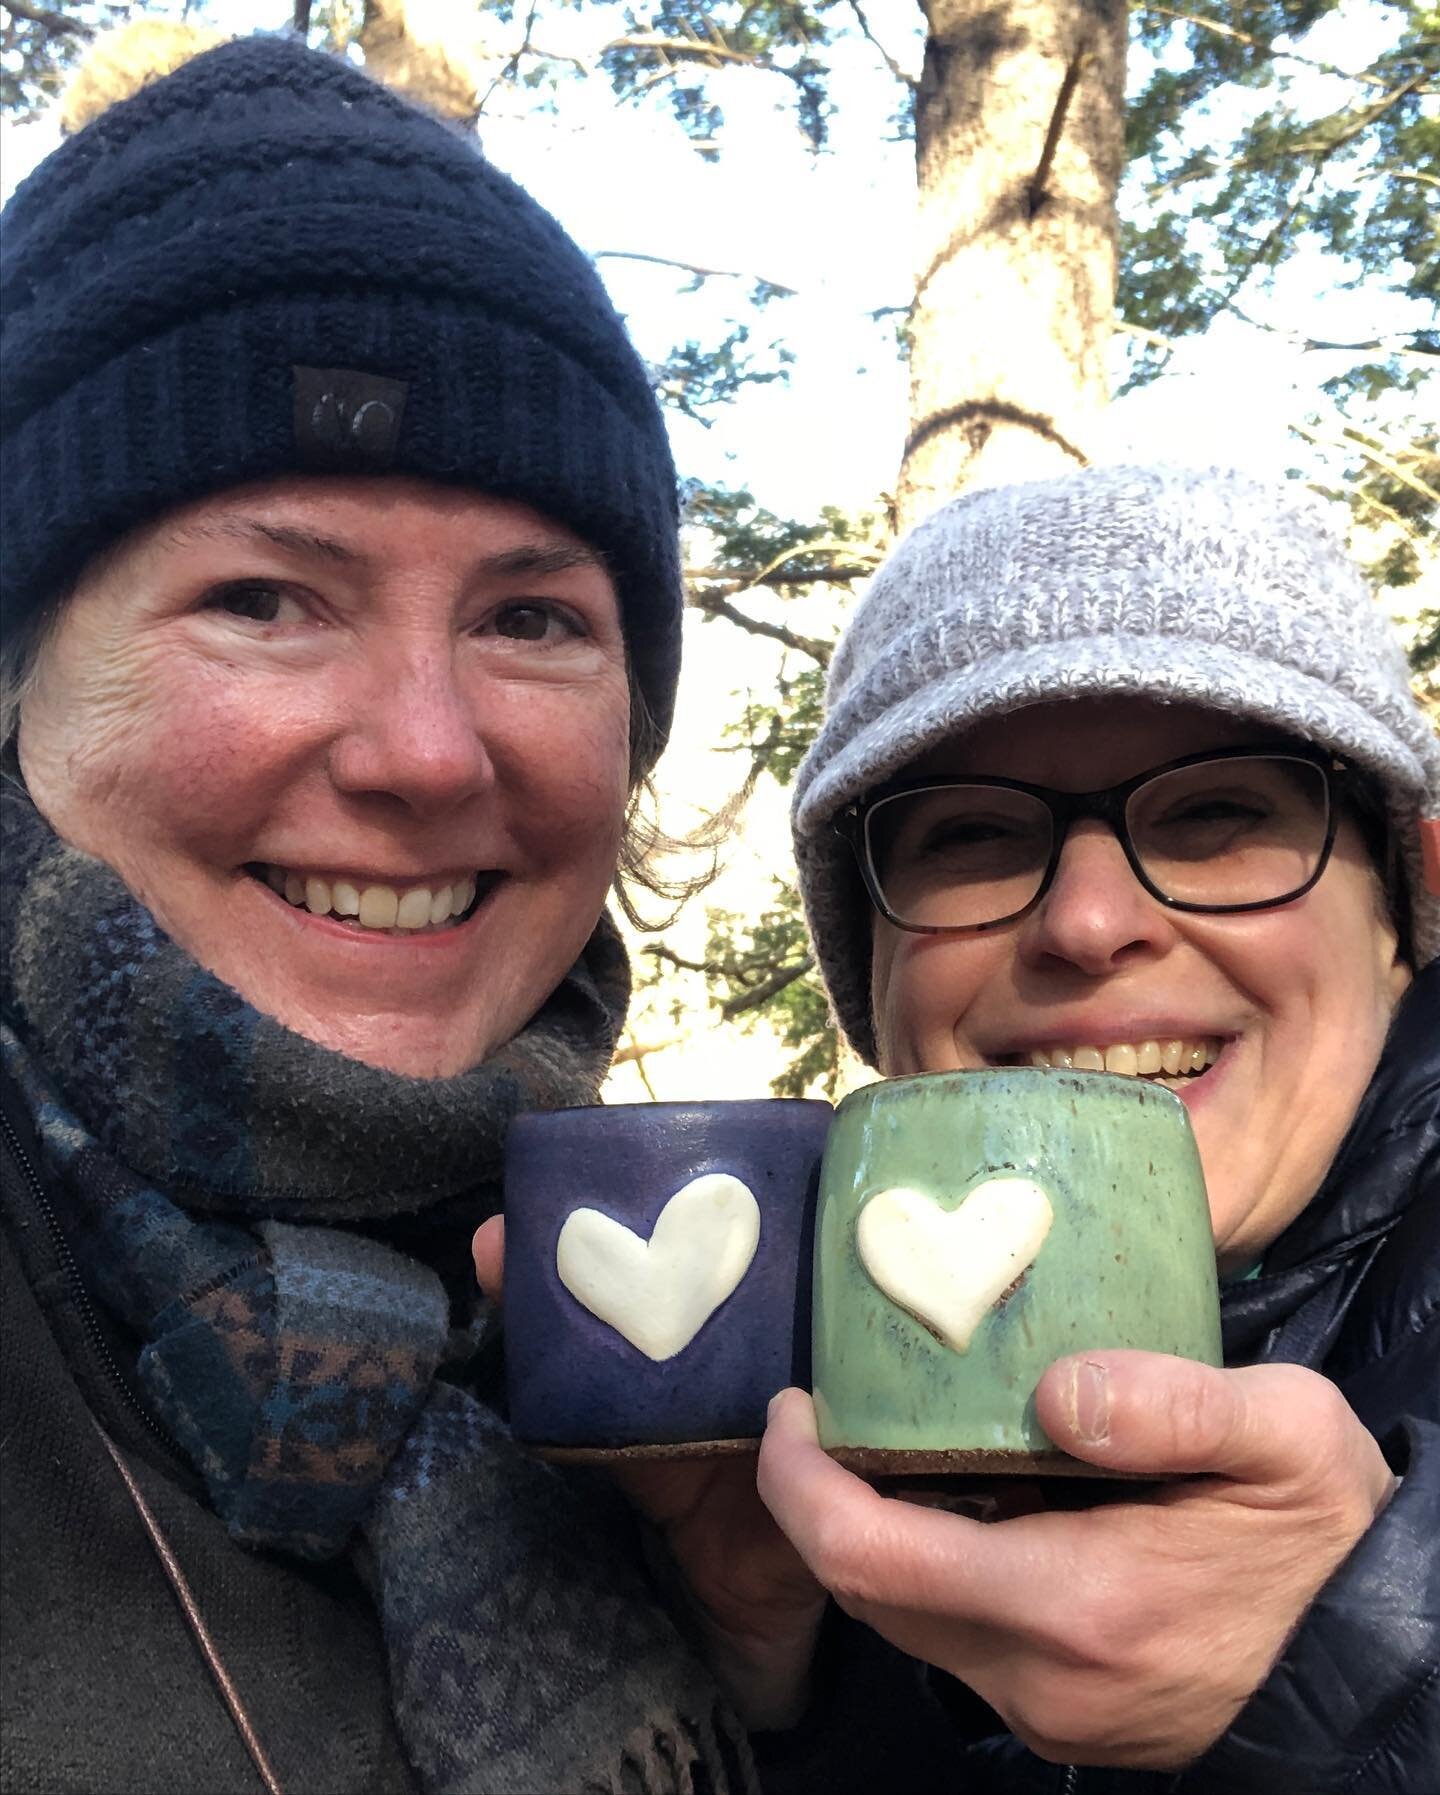 Happy Valentines Day Forest Friends! @oceanfirepottery @kitterylandtrust @regan.stacey @theforesttherapyschool 
💙💚🌿🫖
#foresttherapy #selfcare #bluefernforestbathing